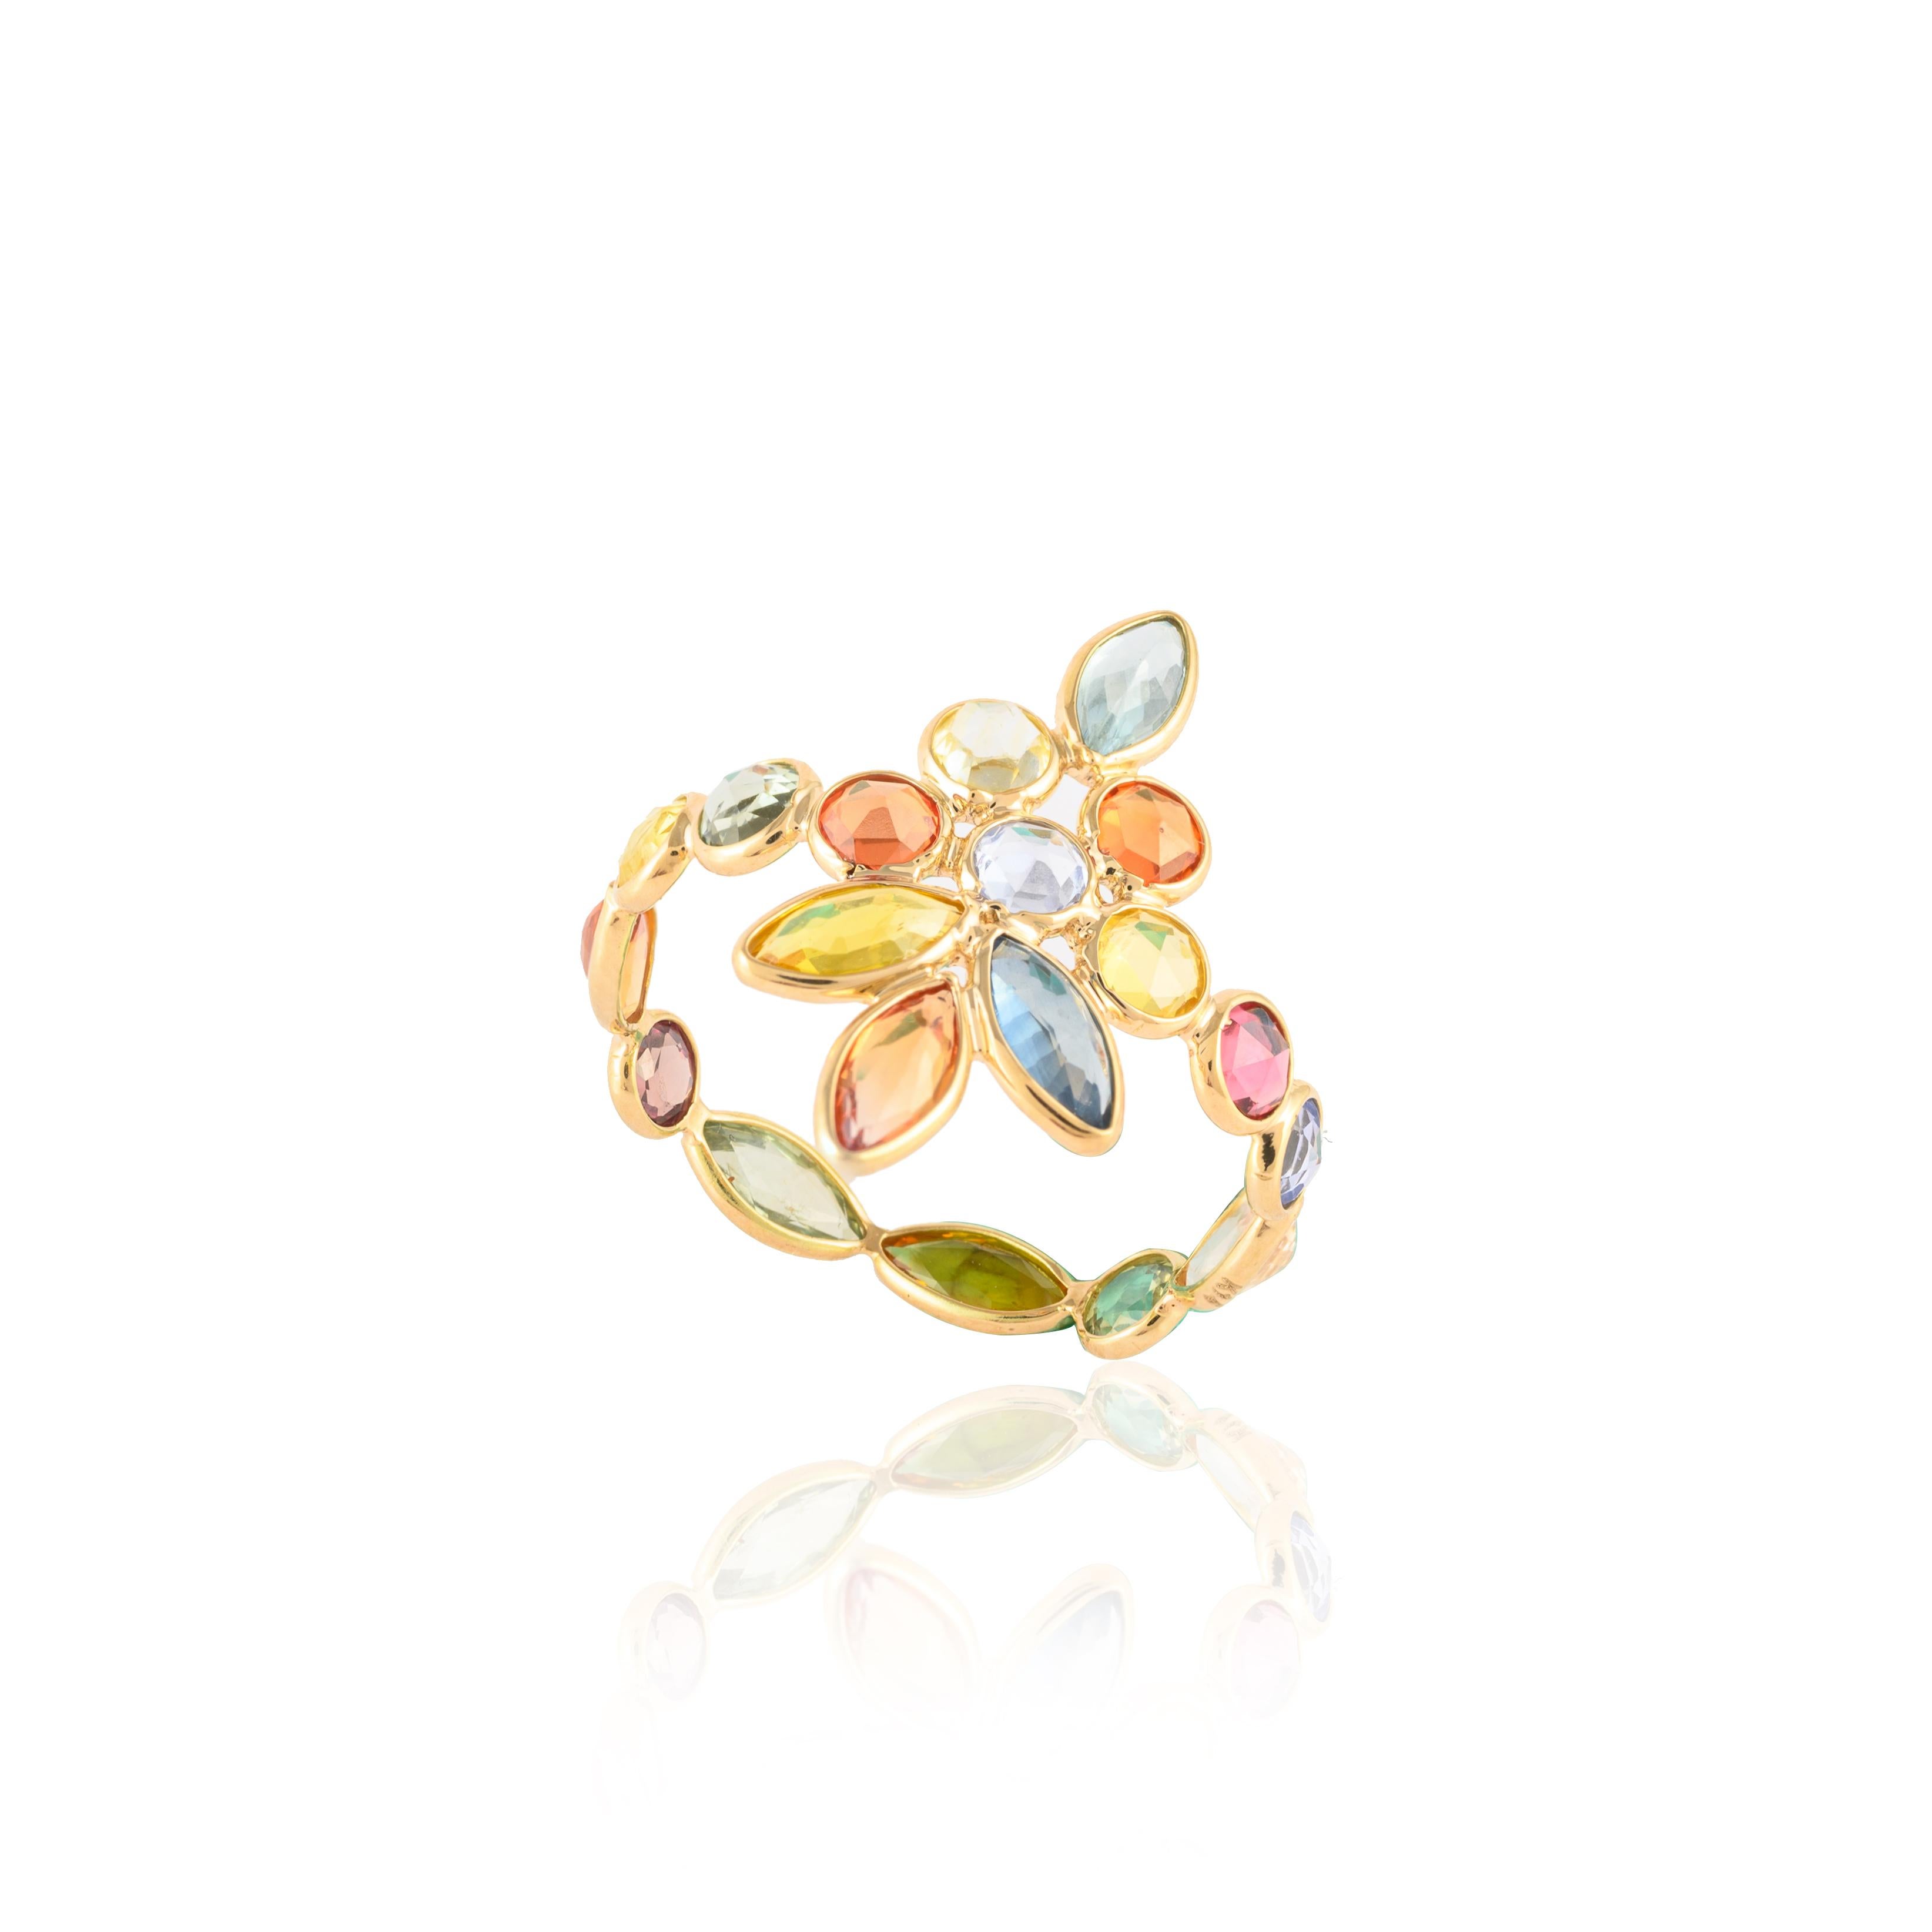 For Sale:  4.81ct Multi Sapphire Elongated Floral Ring in 14k Solid Yellow Gold 9